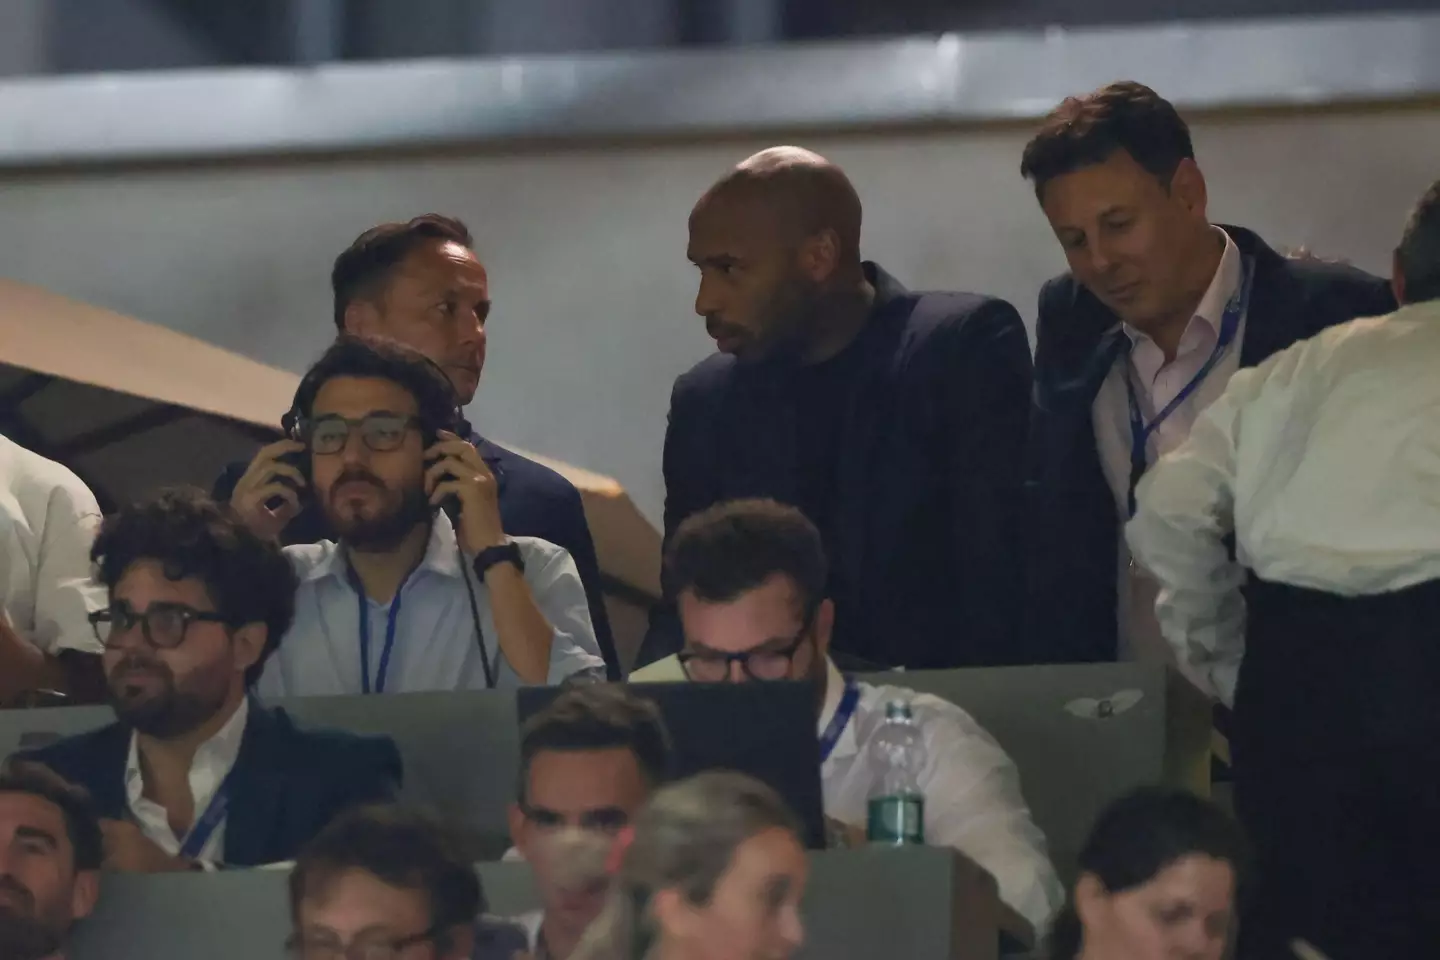 Another former Arsenal star Thierry Henry is an investor in the club, like Fabregas. (